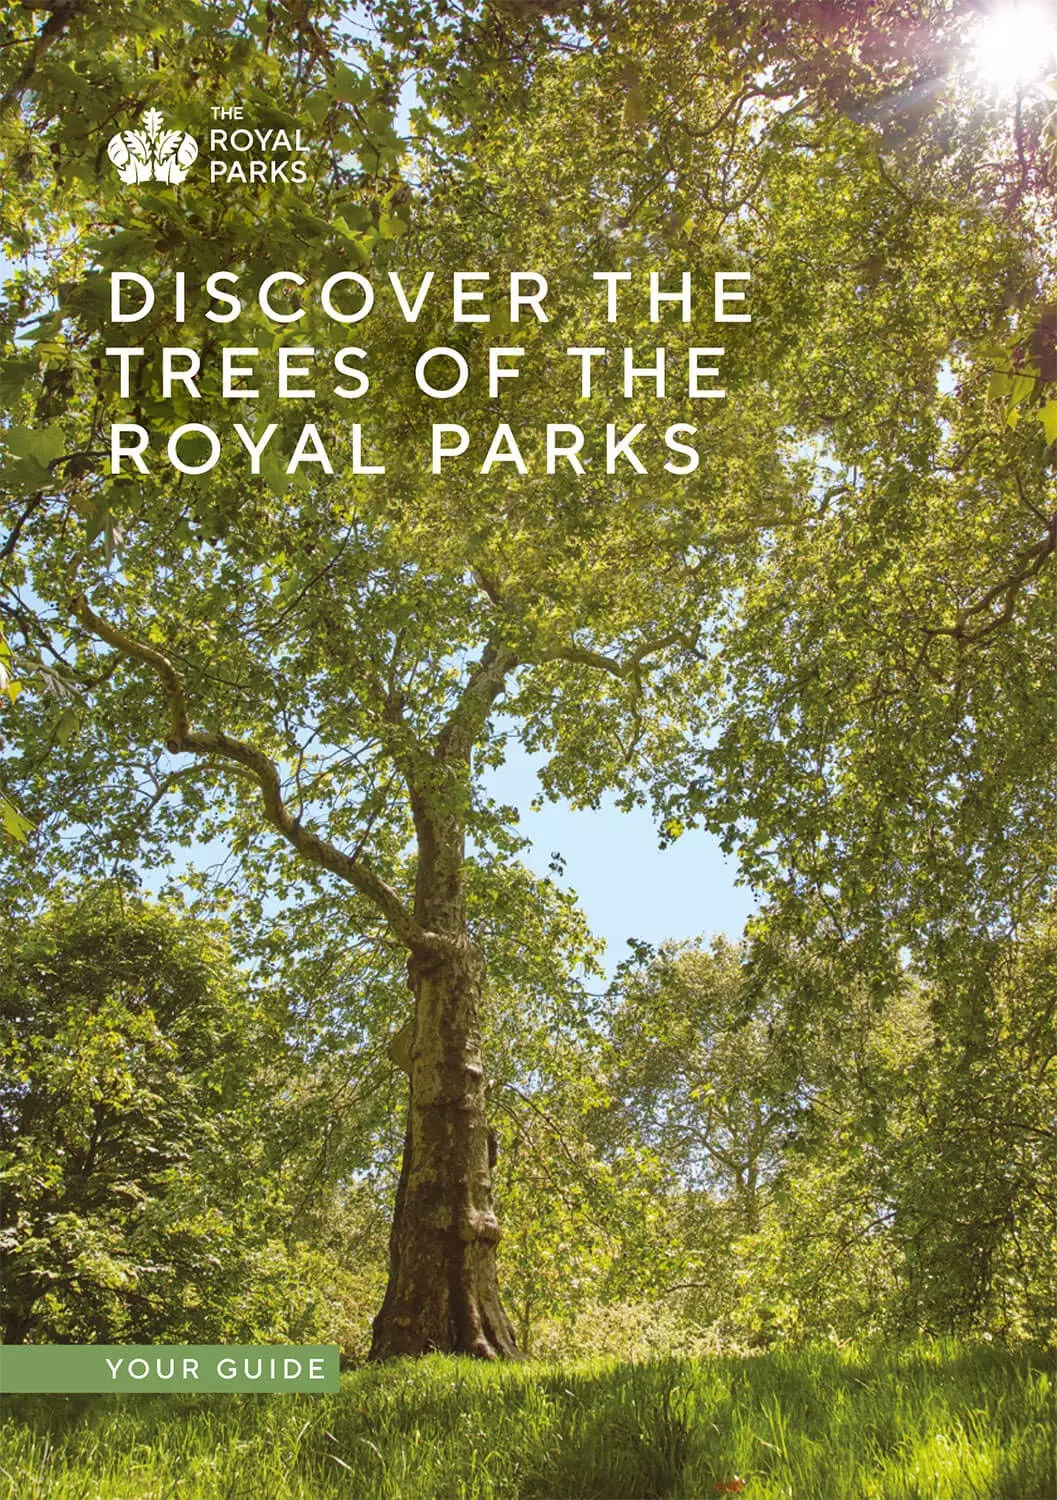 Discover the trees of the Royal Parks (booklet cover image)